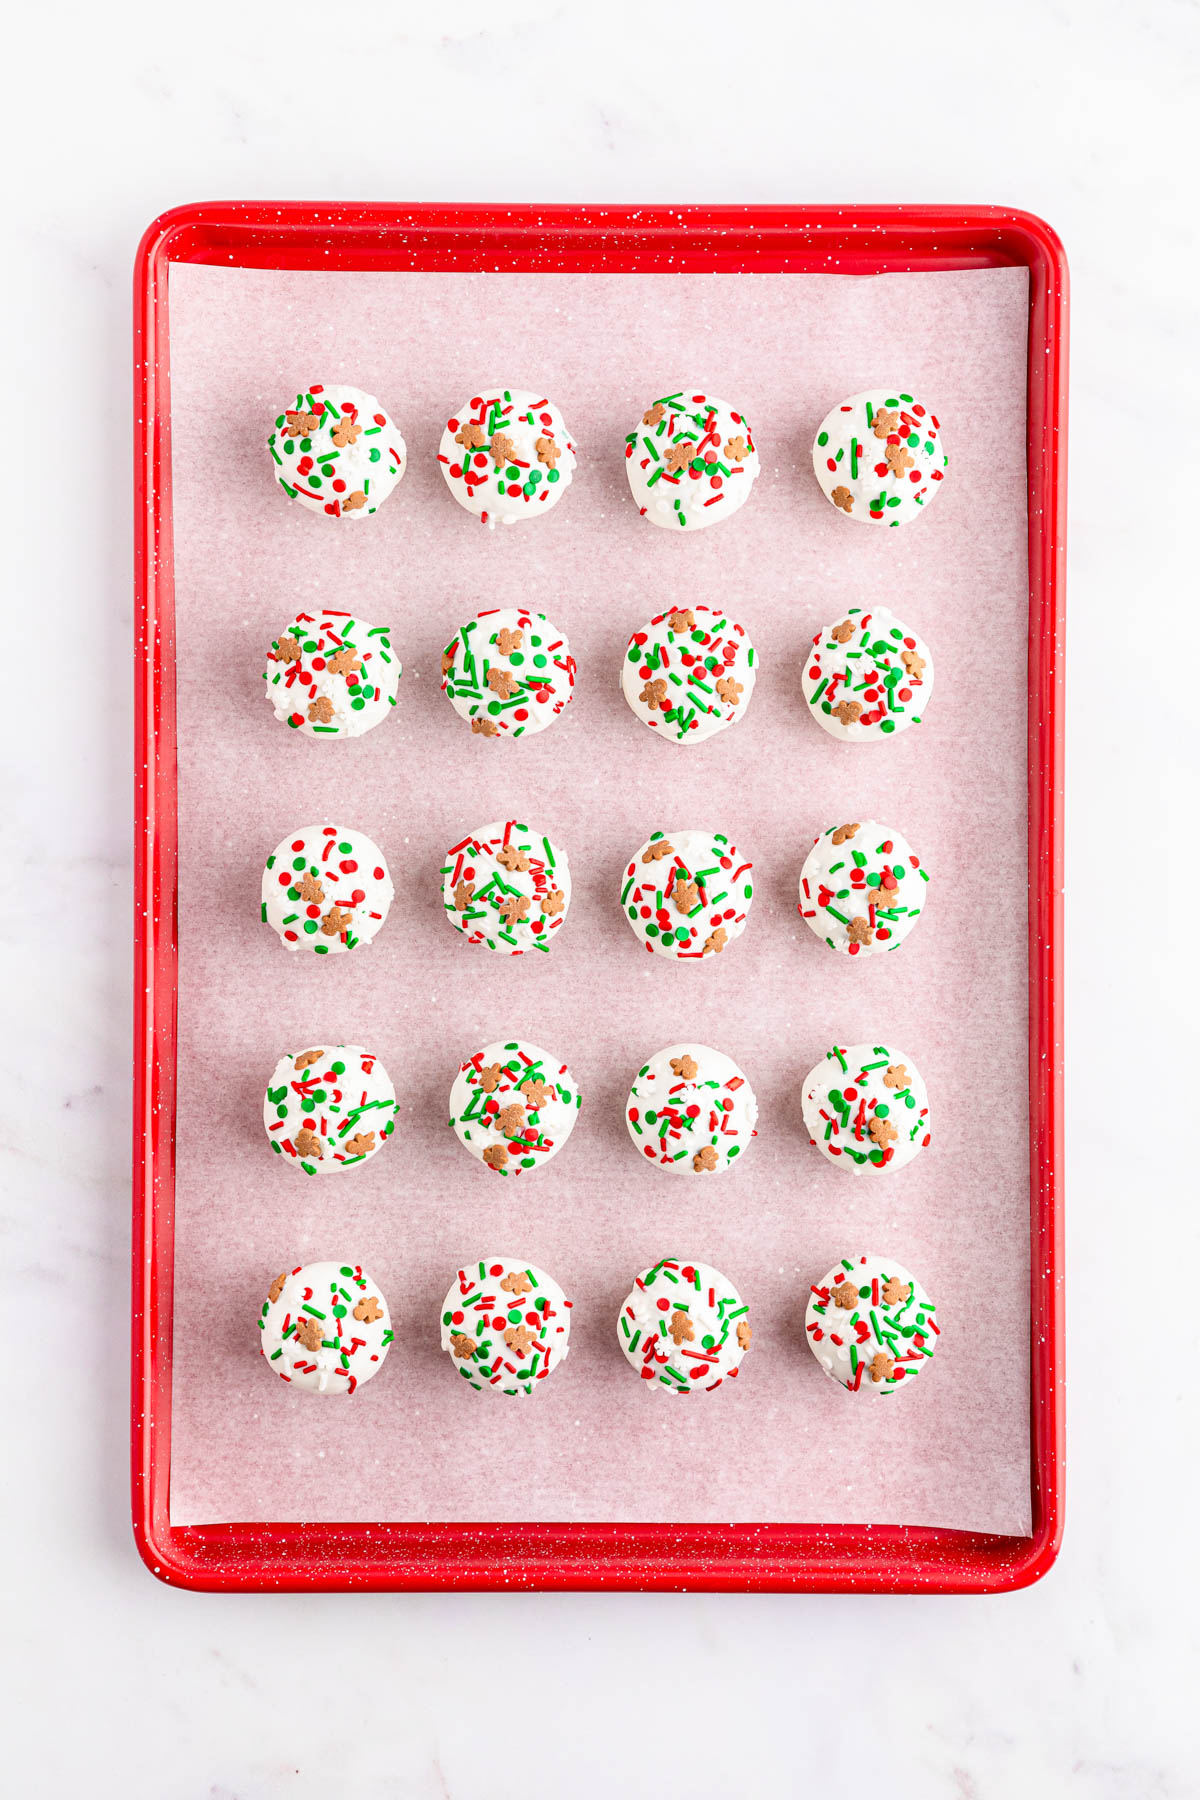 A tray full of Christmas truffles with sprinkles on them